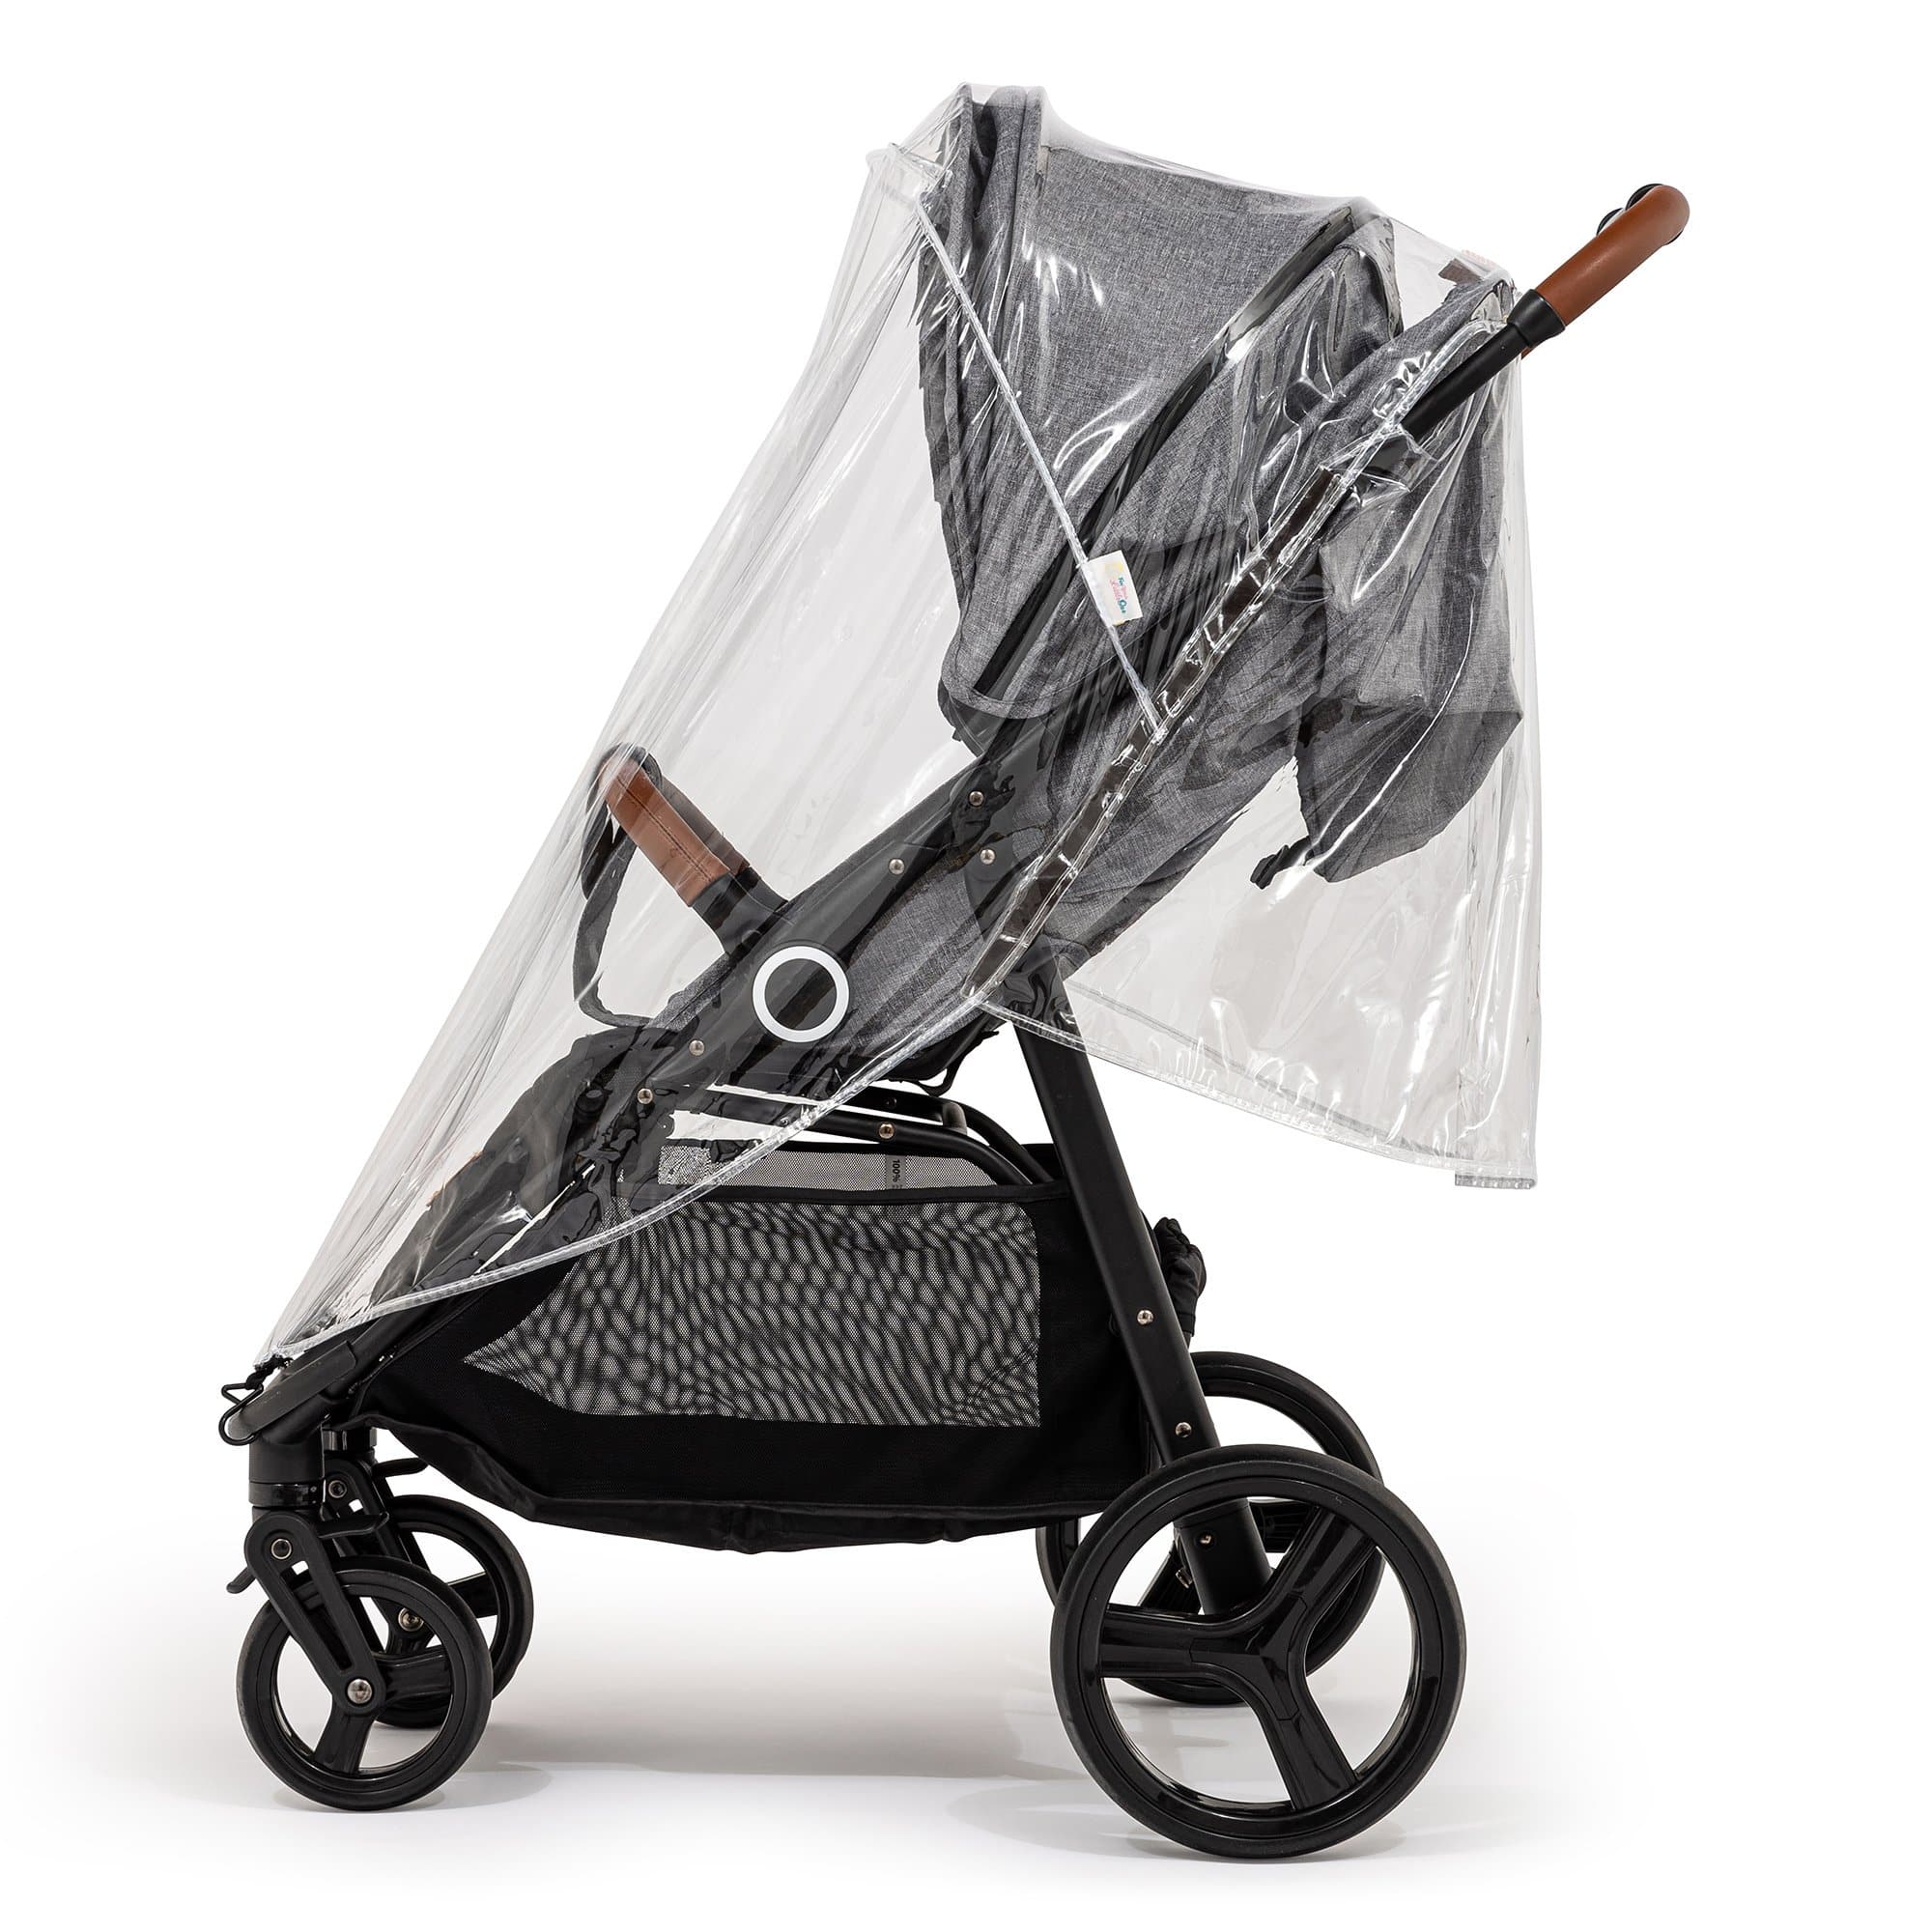 Universal Rain Cover For Buggys - Fits All Models - For Your Little One